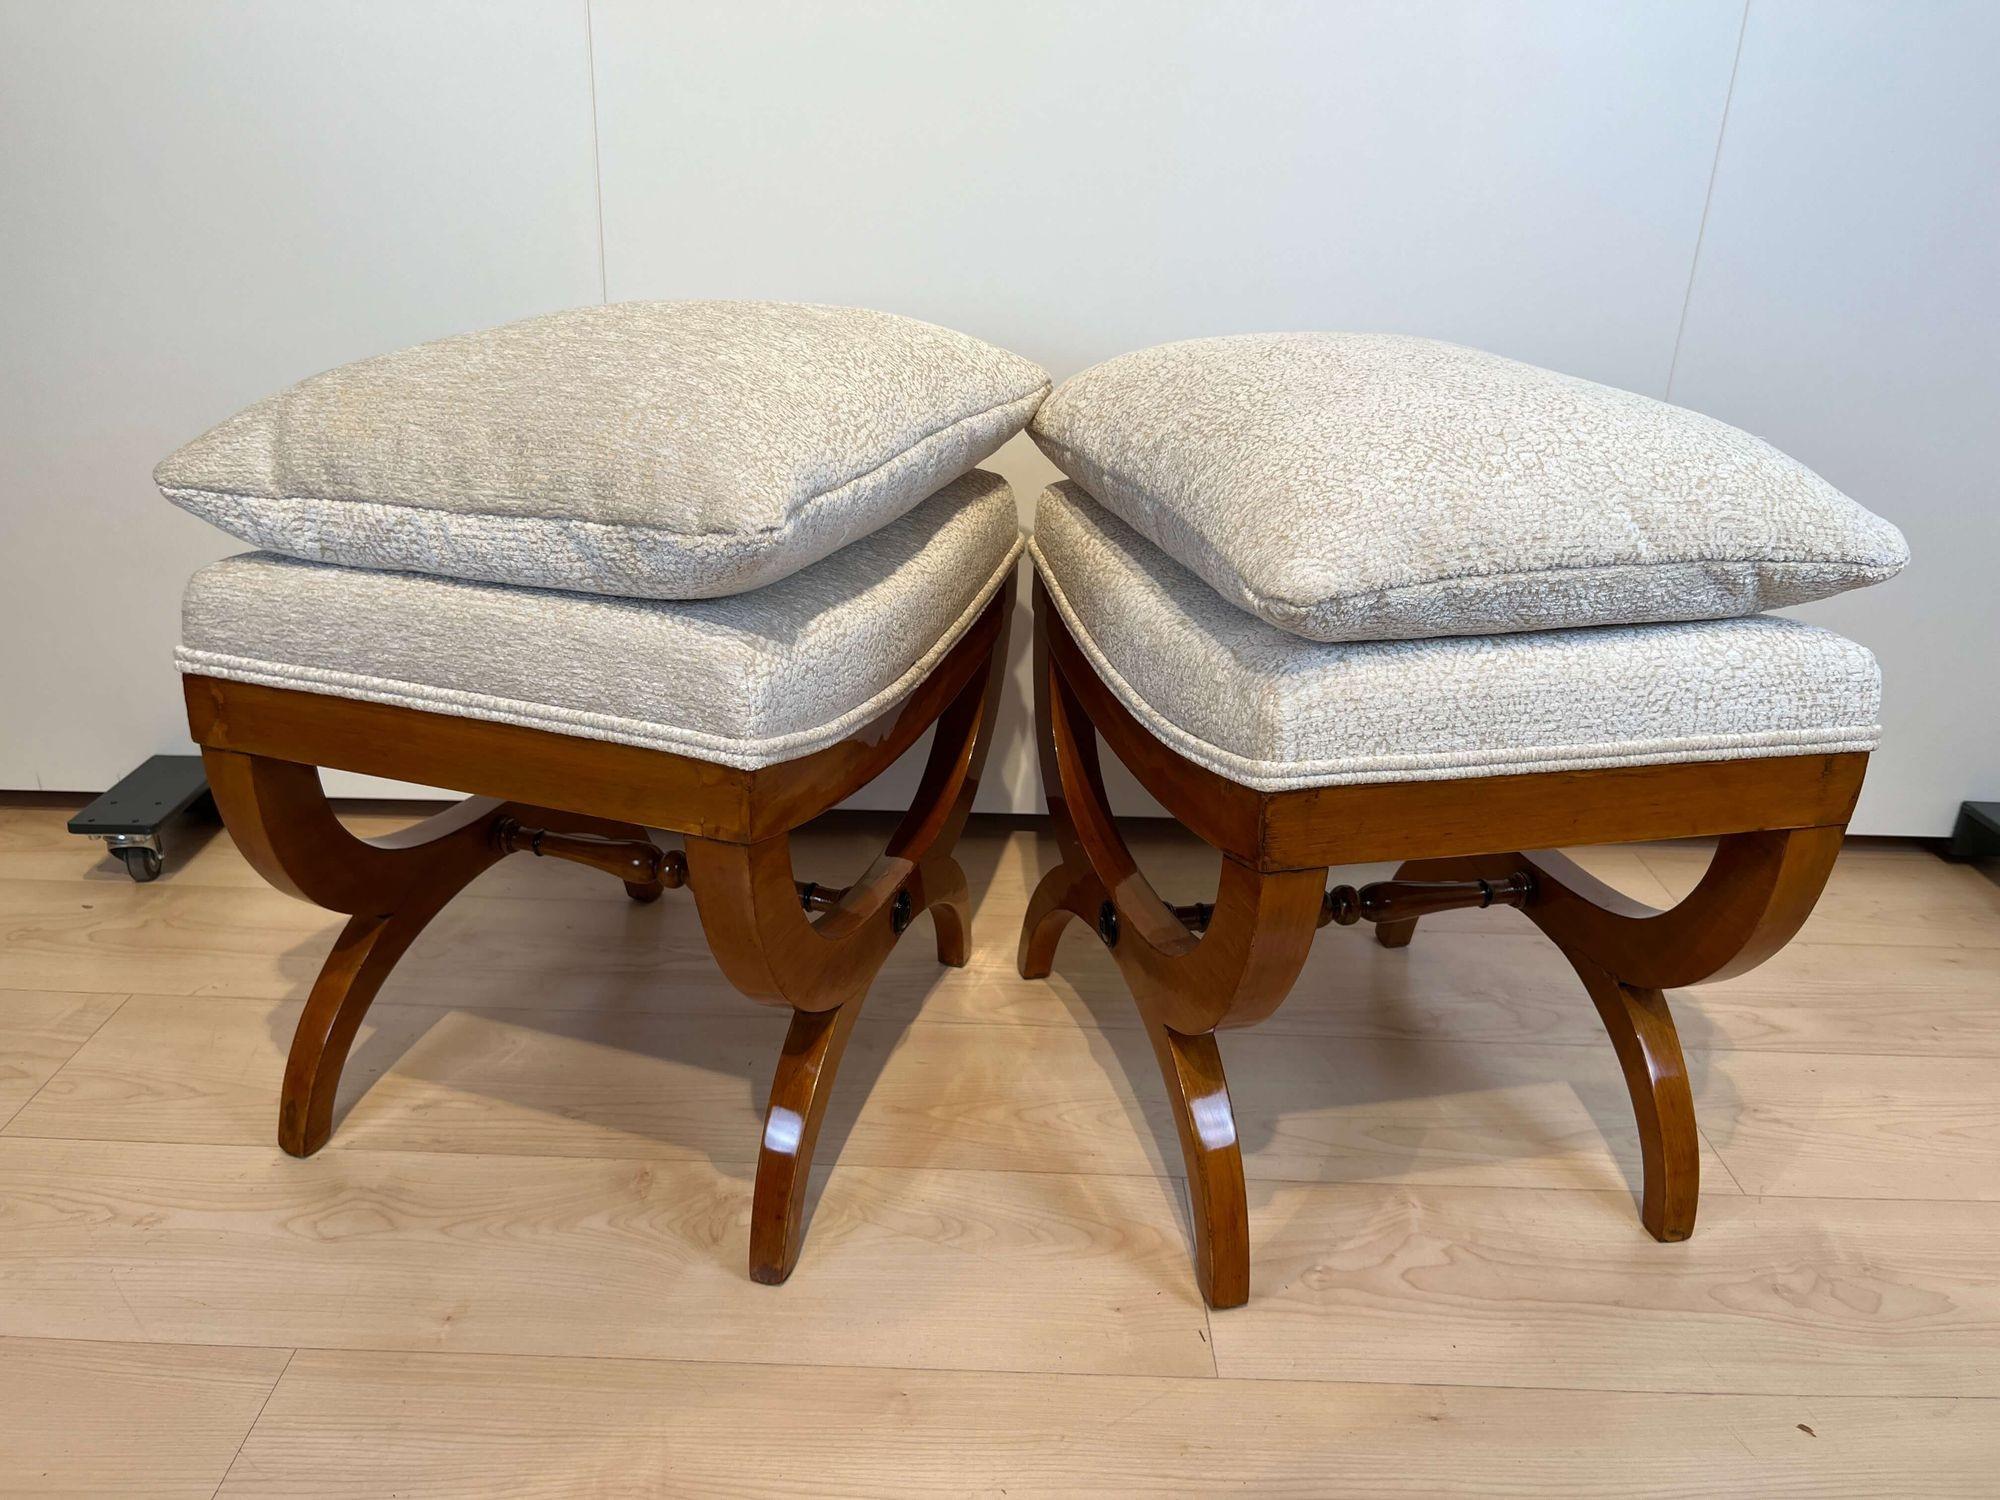 Pair of Large Tabourets, Beech Wood, France, circa 1860 For Sale 6